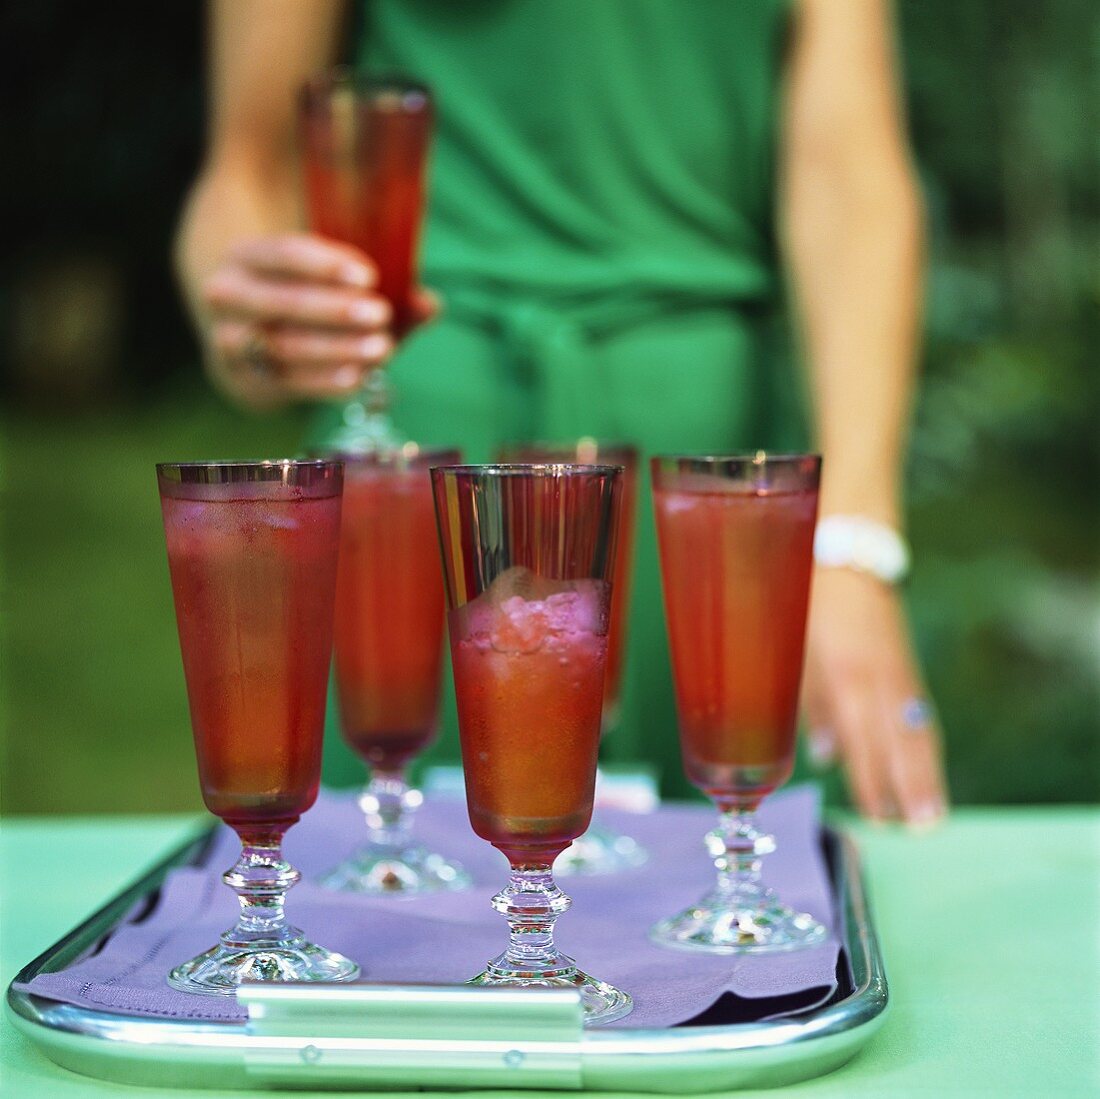 Drinks with strawberries on tray in open air